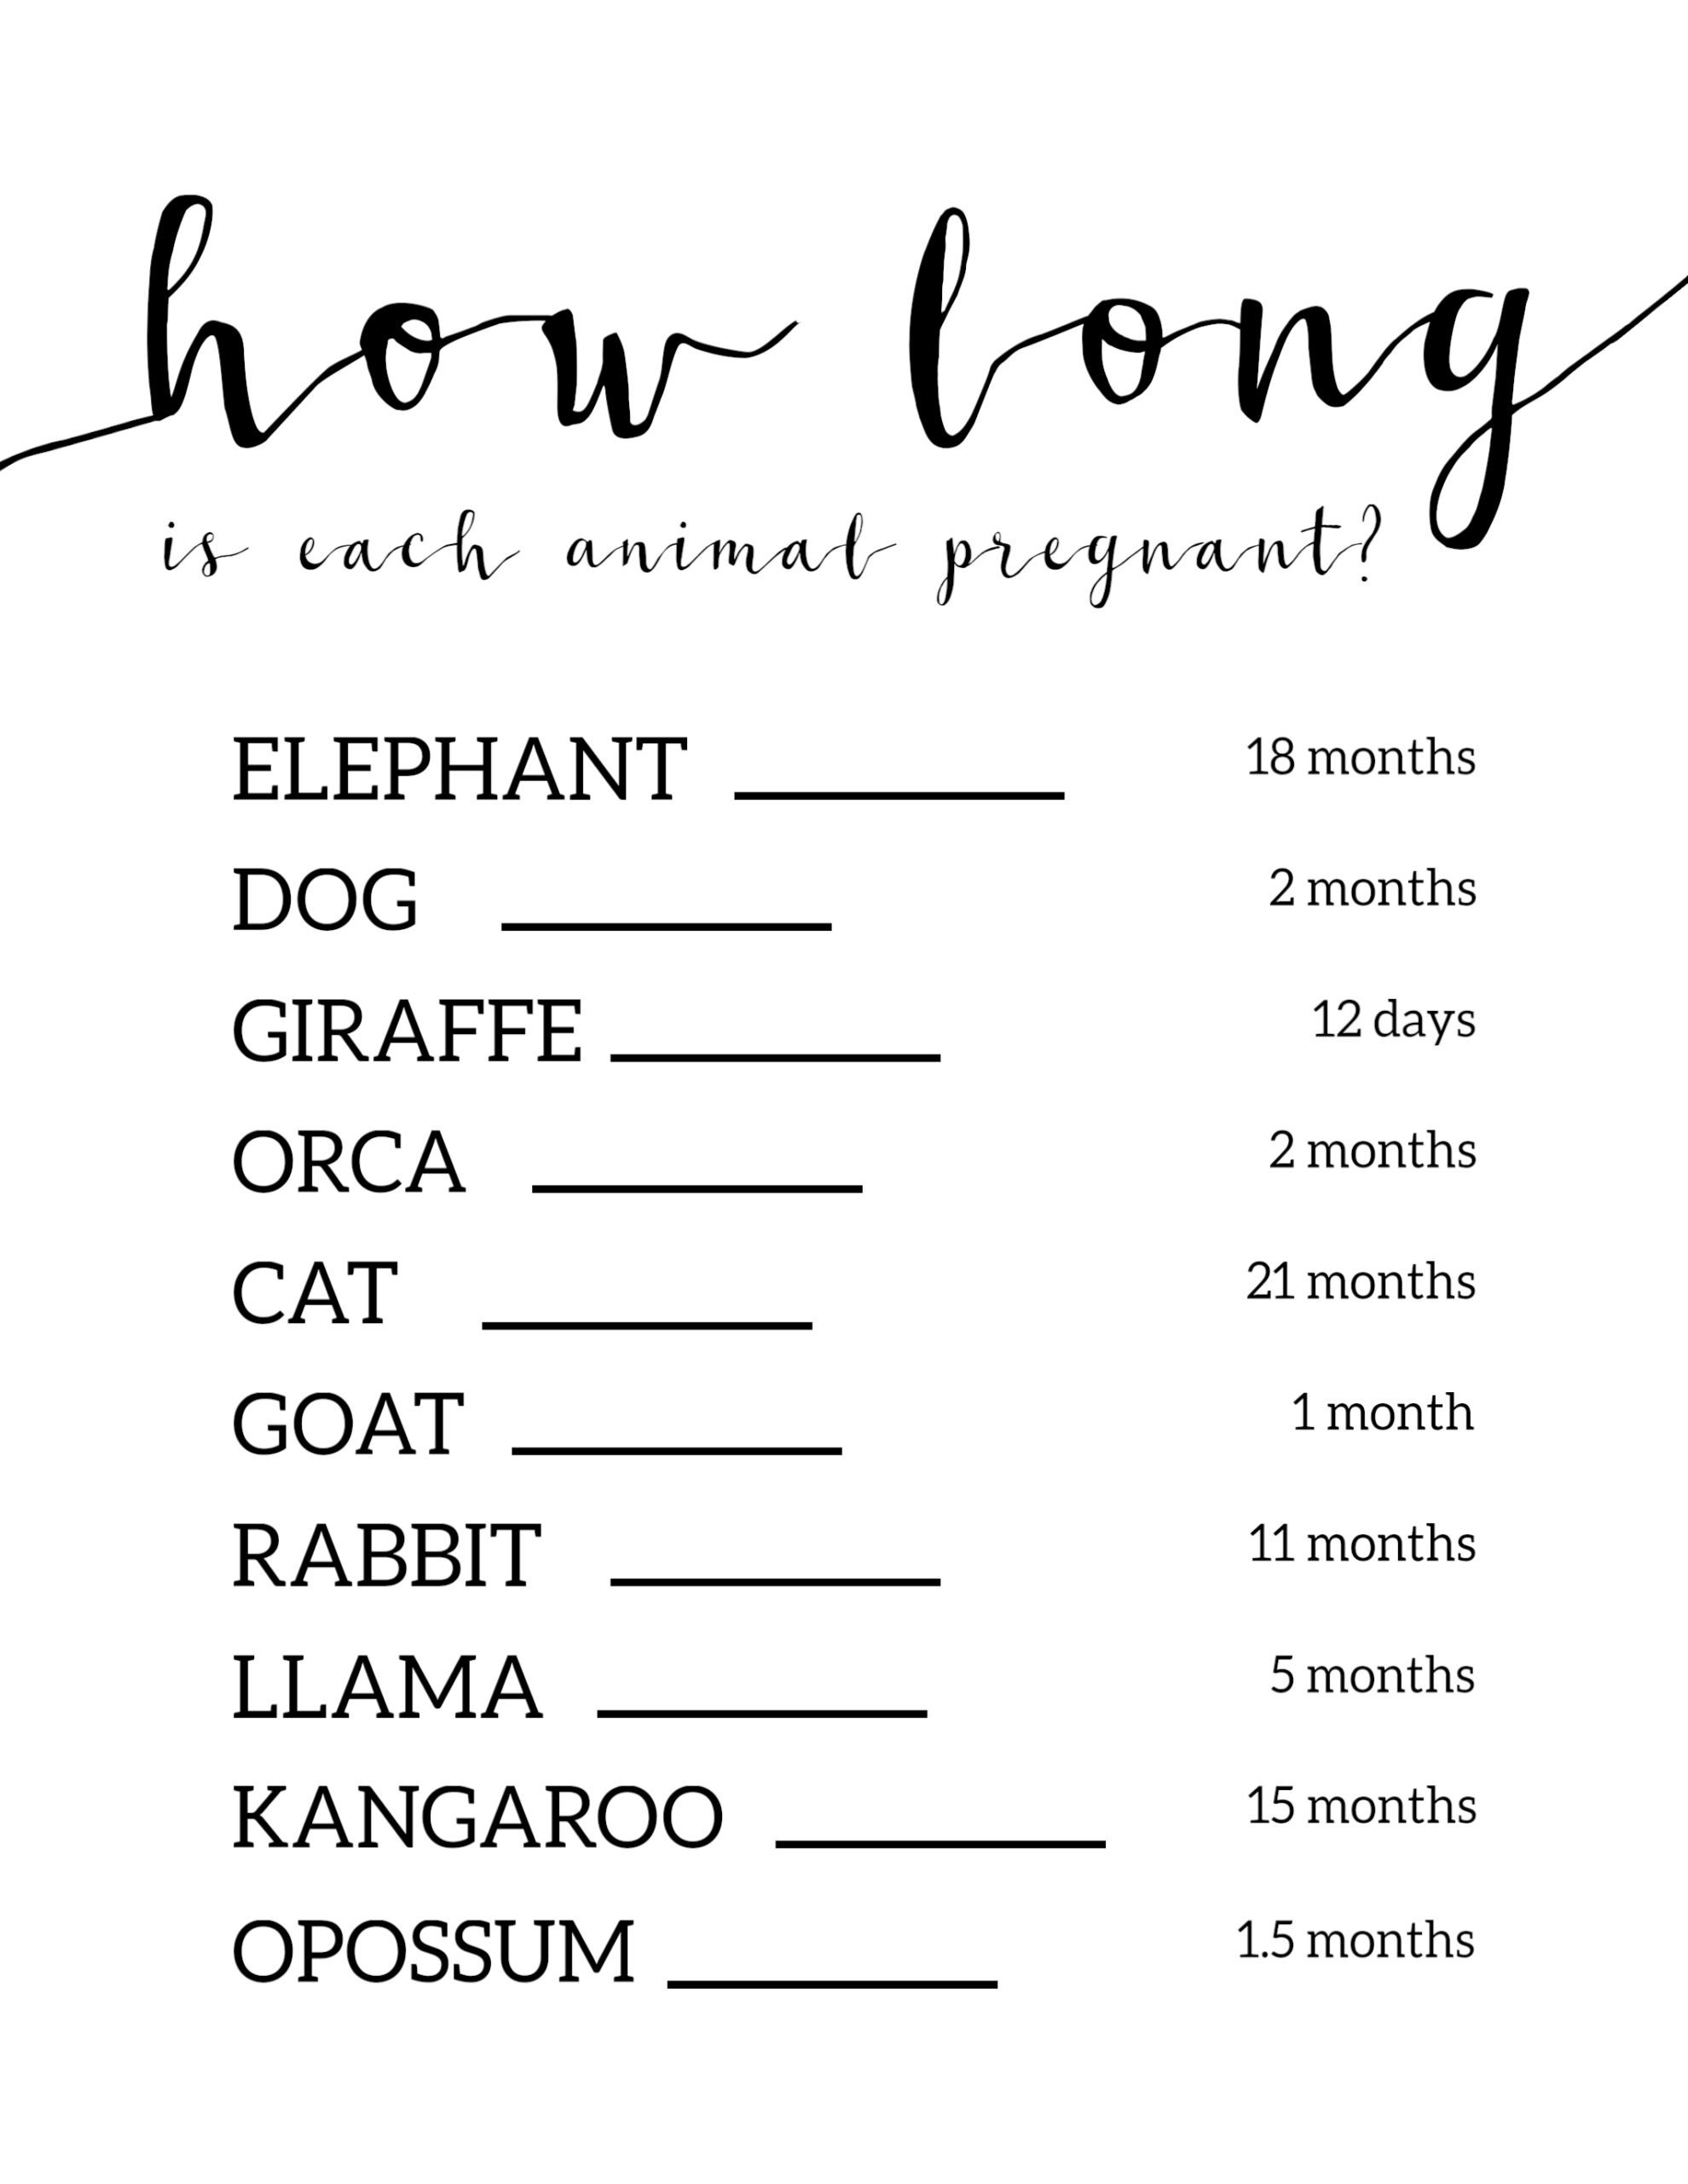 Free Baby Shower Games Printable {Animal Pregnancies} - Paper Trail - Find The Guest Baby Shower Game Free Printable